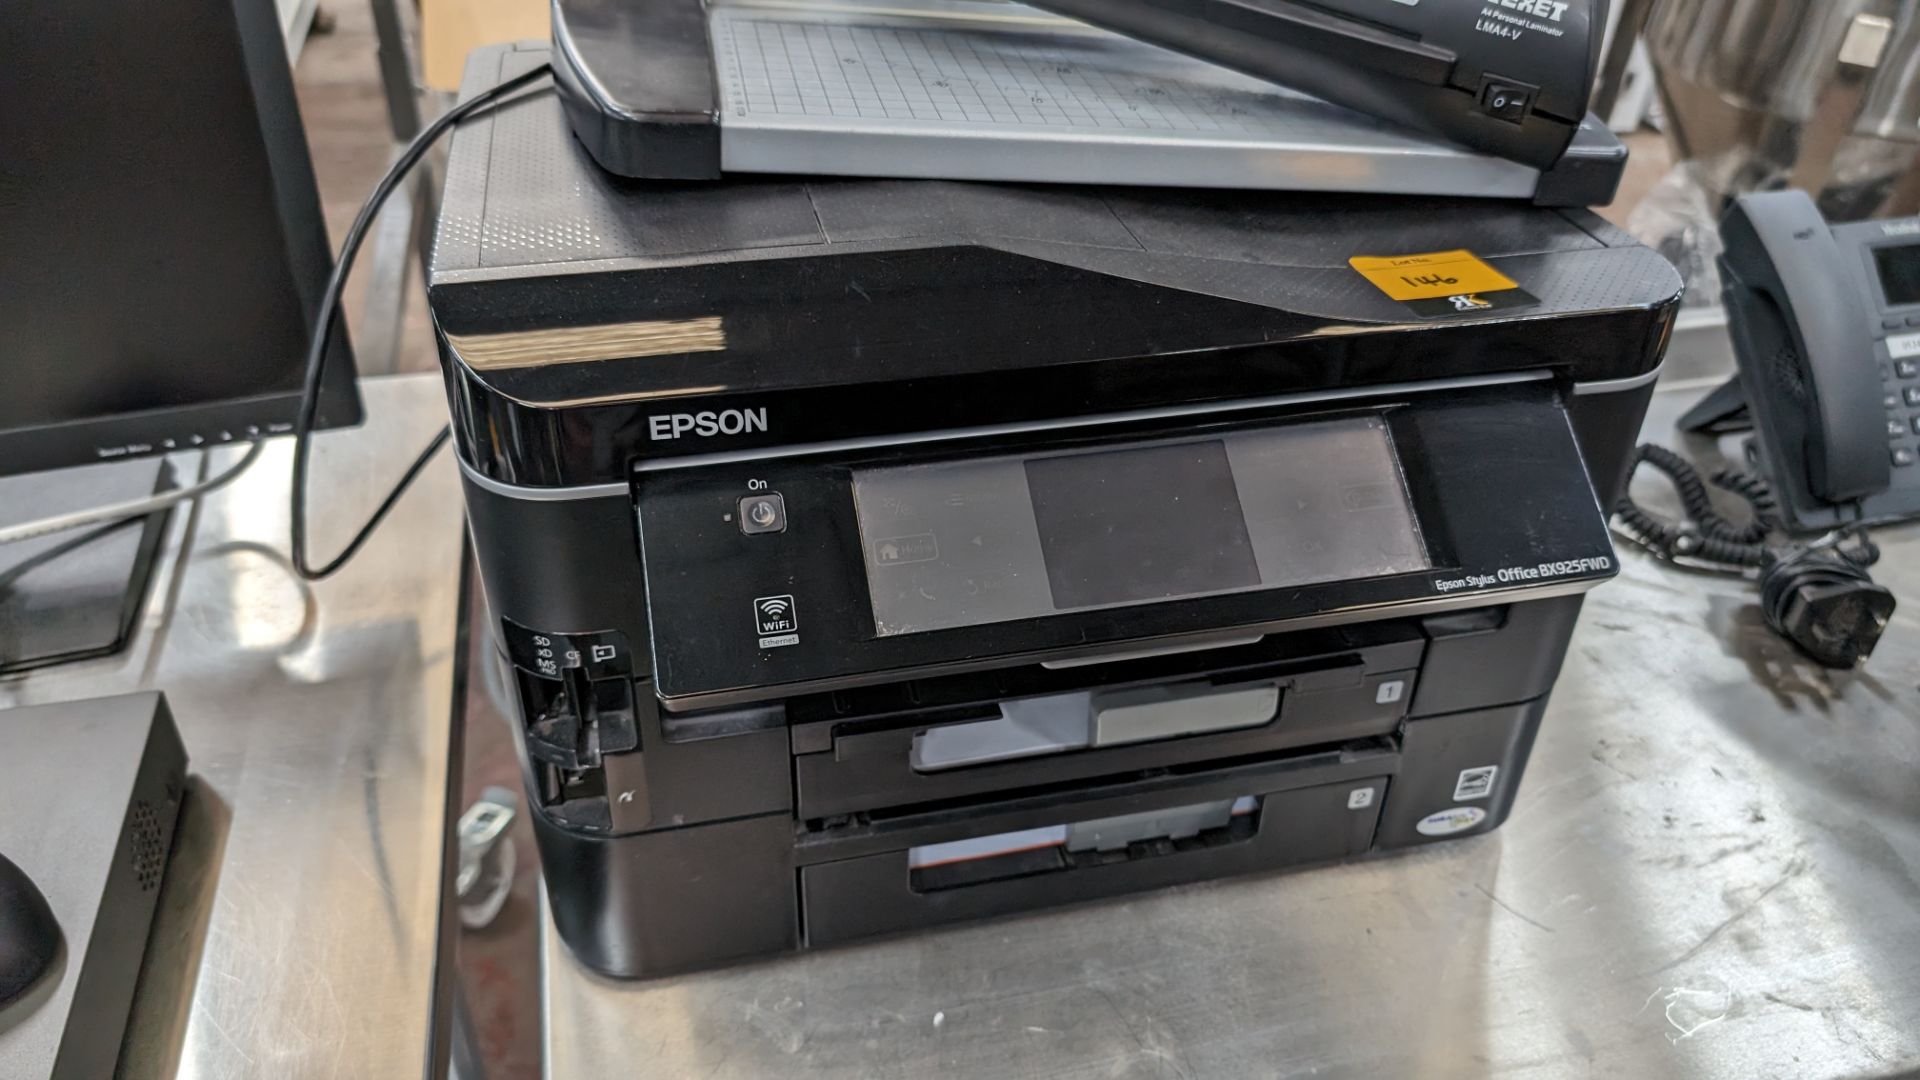 Epson Stylus Office multi-function printer, model BX925FWD, including 2 off paper cassettes, plus of - Image 4 of 6